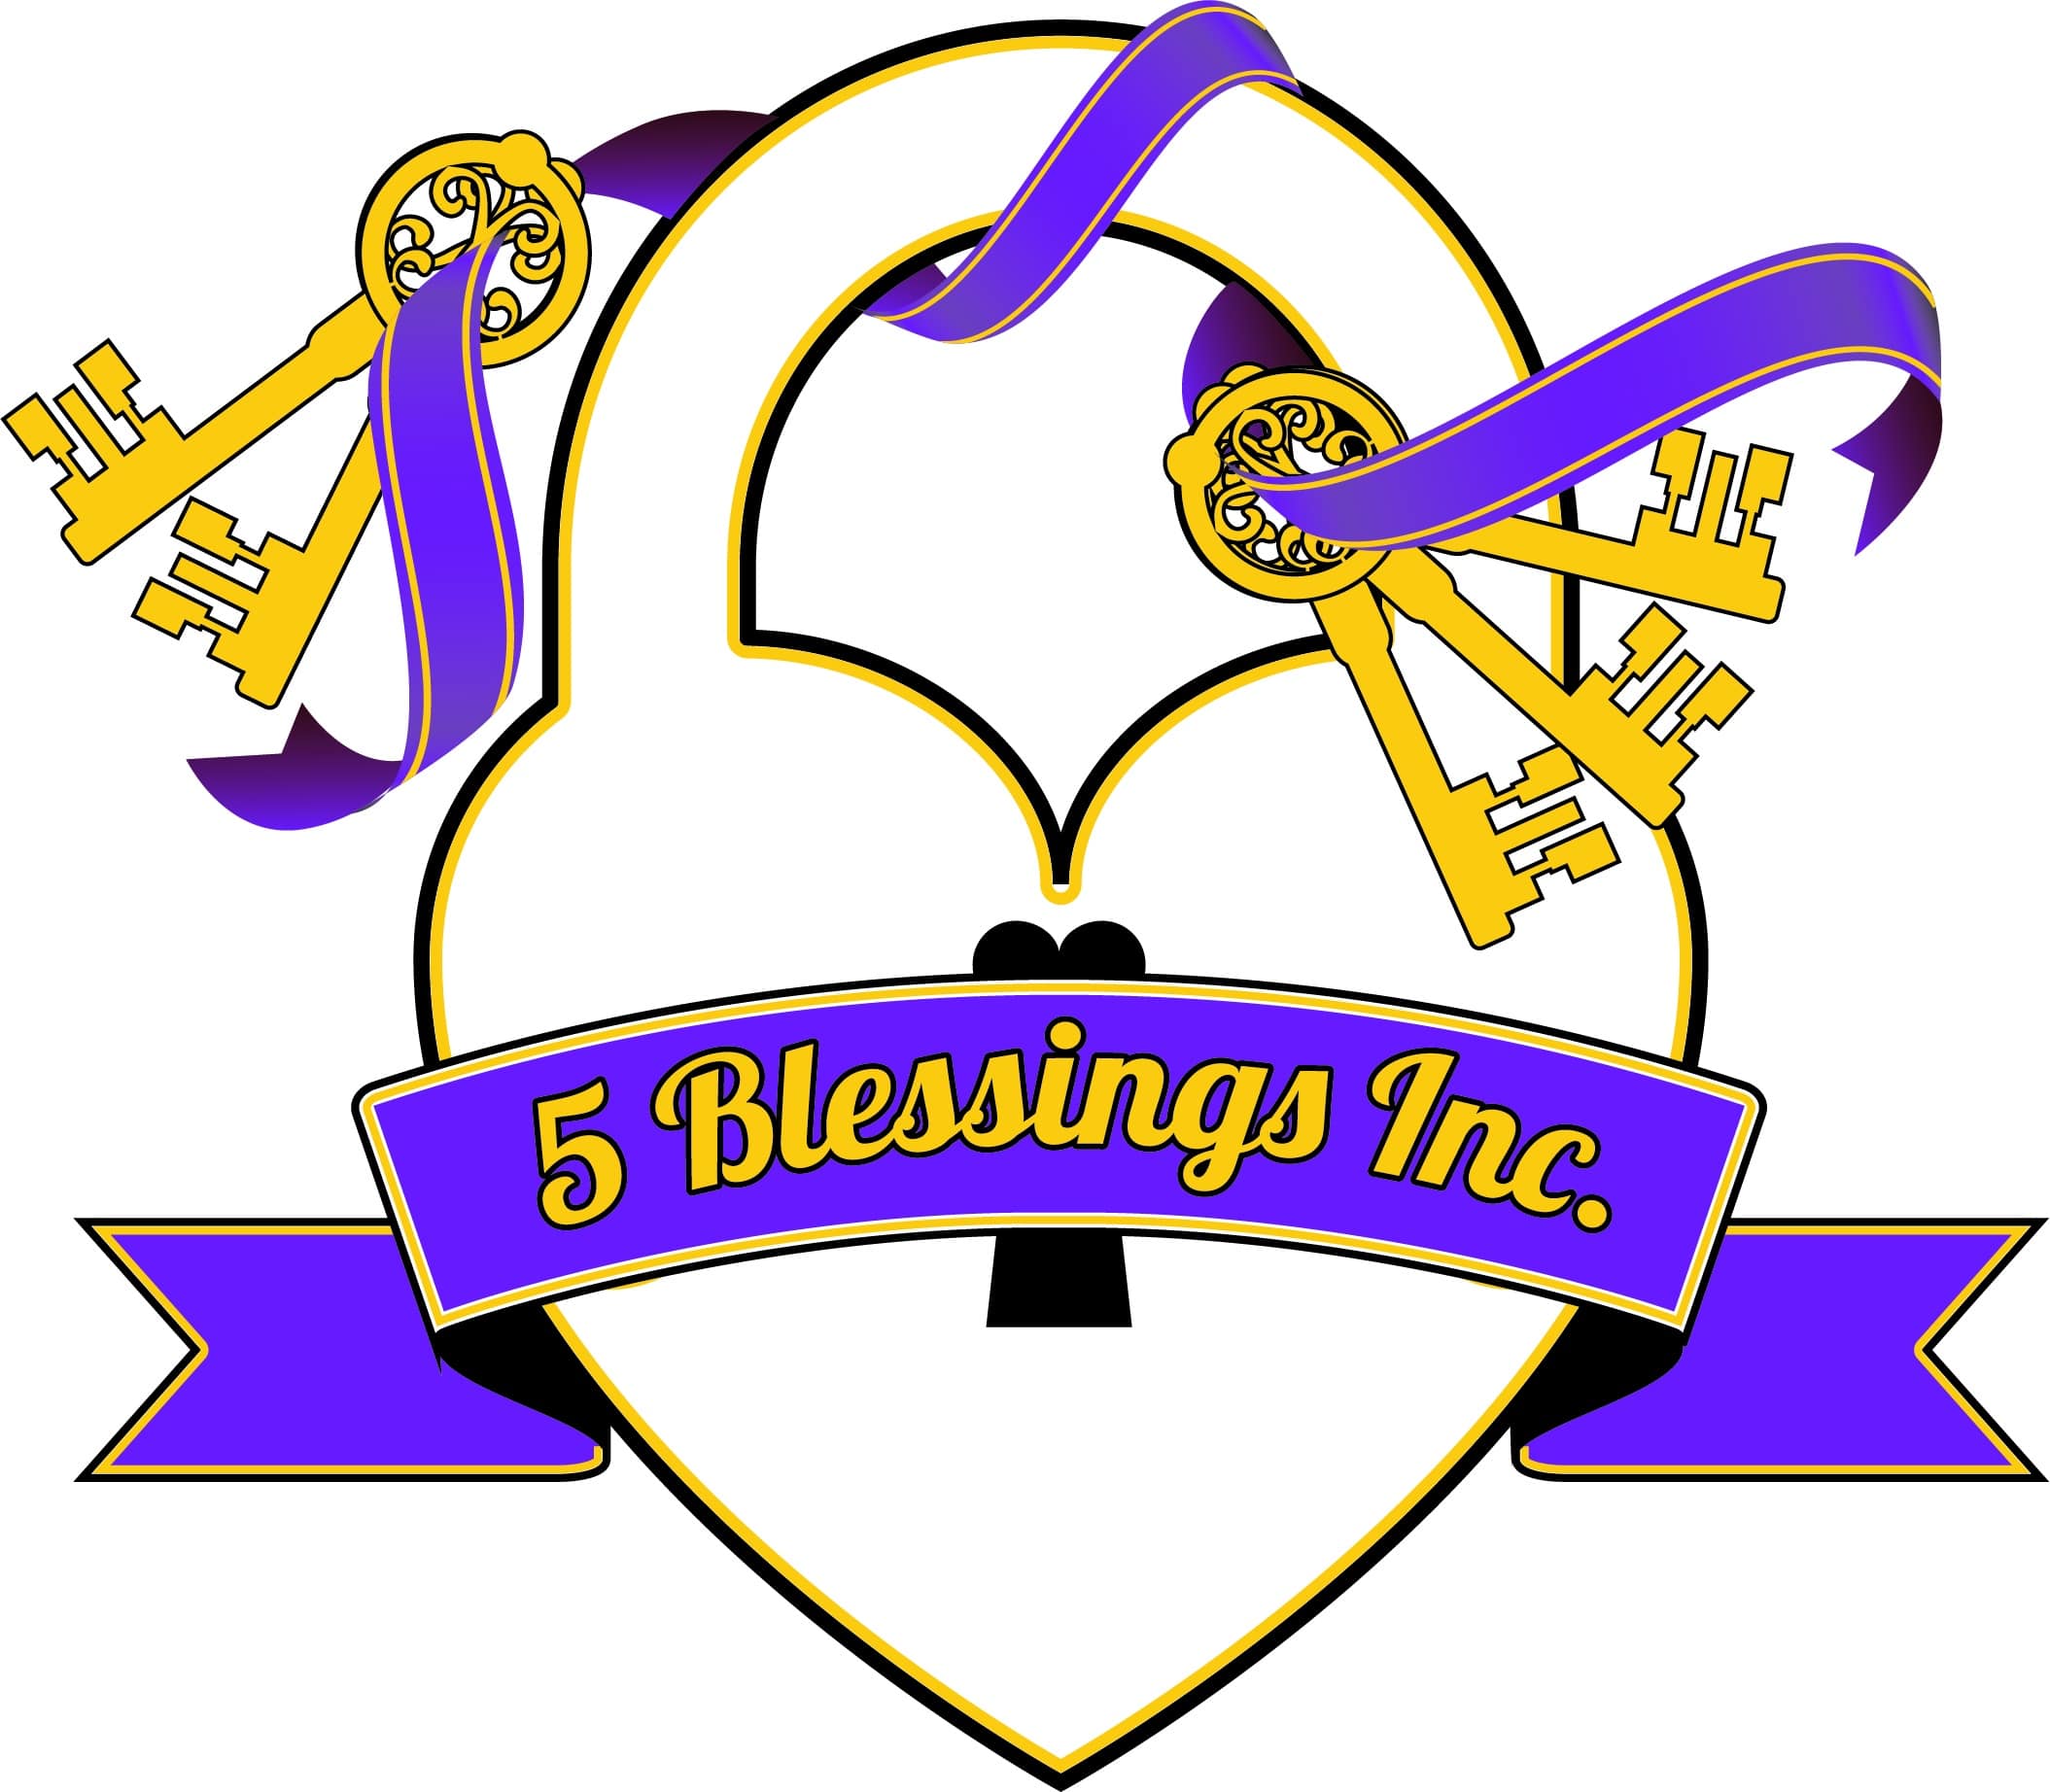 5 Blessings Incorporated